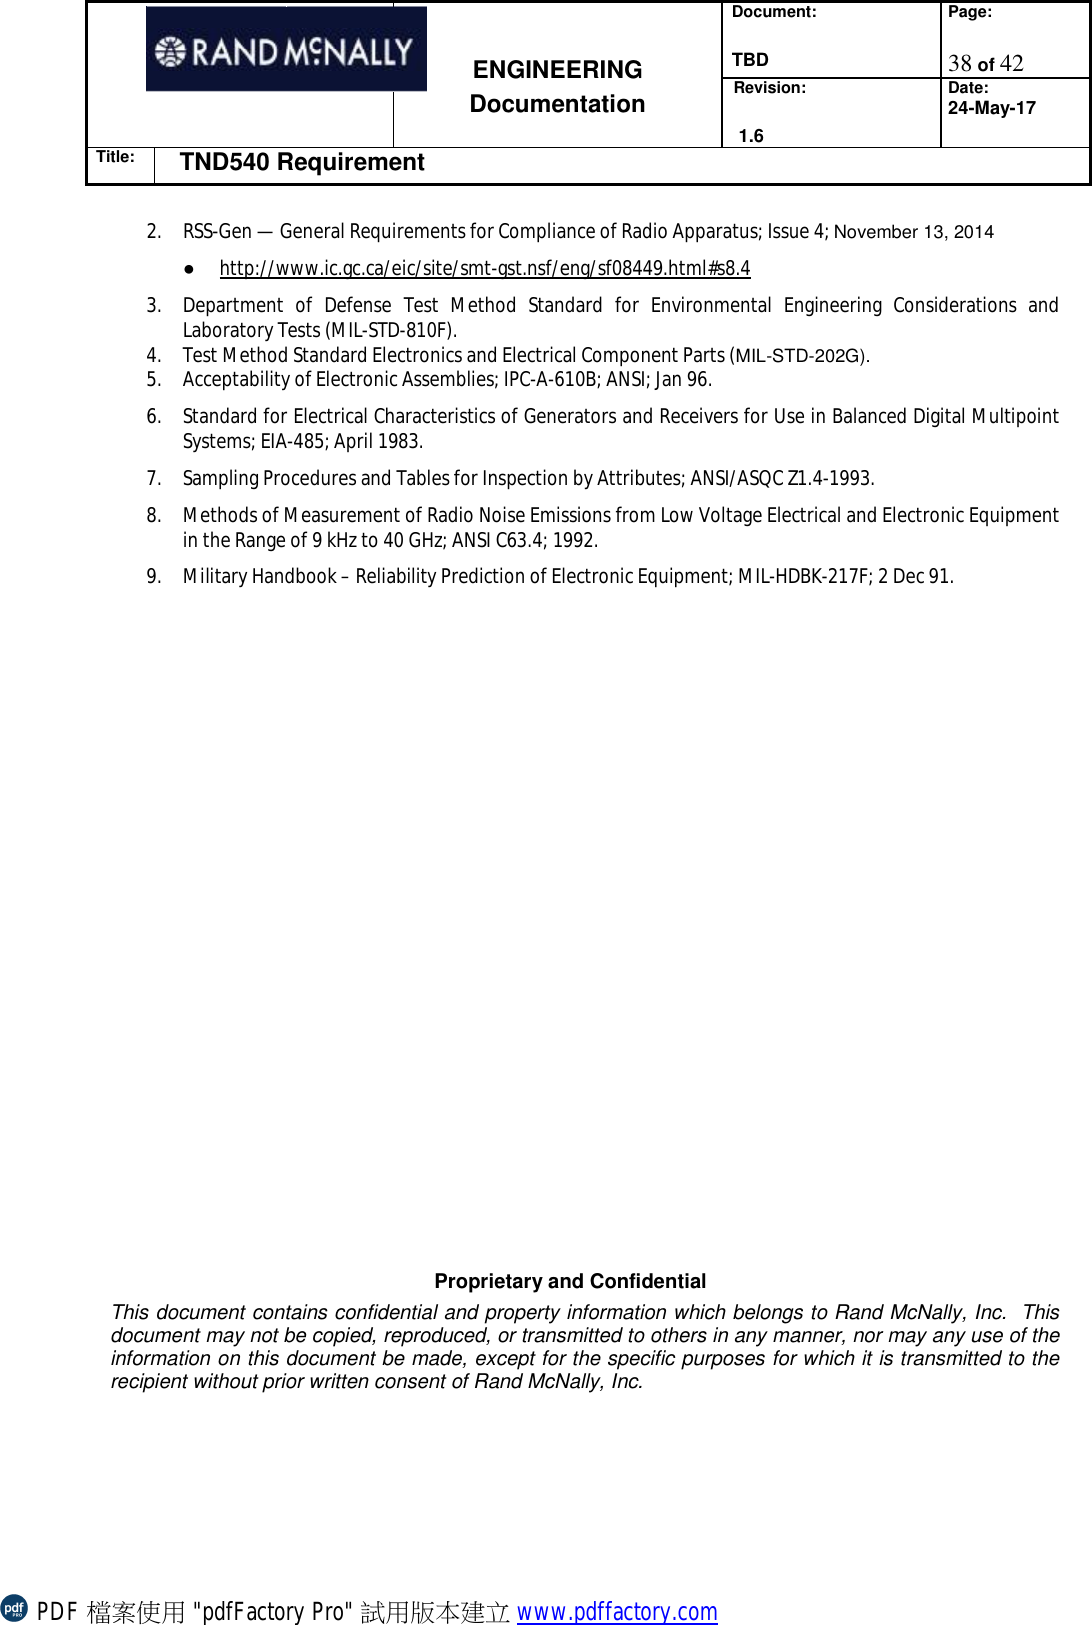 Document:  TBD Page:  38 of 42   ENGINEERING Documentation Revision:   1.6 Date: 24-May-17 Title: TND540 Requirement  Proprietary and Confidential This document contains confidential and property information which belongs to Rand McNally, Inc.  This document may not be copied, reproduced, or transmitted to others in any manner, nor may any use of the information on this document be made, except for the specific purposes for which it is transmitted to the recipient without prior written consent of Rand McNally, Inc.   2. RSS-Gen — General Requirements for Compliance of Radio Apparatus; Issue 4; November 13, 2014 ● http://www.ic.gc.ca/eic/site/smt-gst.nsf/eng/sf08449.html#s8.4 3. Department of Defense Test Method Standard for Environmental Engineering Considerations and Laboratory Tests (MIL-STD-810F). 4. Test Method Standard Electronics and Electrical Component Parts (MIL-STD-202G). 5. Acceptability of Electronic Assemblies; IPC-A-610B; ANSI; Jan 96. 6. Standard for Electrical Characteristics of Generators and Receivers for Use in Balanced Digital Multipoint Systems; EIA-485; April 1983. 7. Sampling Procedures and Tables for Inspection by Attributes; ANSI/ASQC Z1.4-1993. 8. Methods of Measurement of Radio Noise Emissions from Low Voltage Electrical and Electronic Equipment in the Range of 9 kHz to 40 GHz; ANSI C63.4; 1992. 9. Military Handbook – Reliability Prediction of Electronic Equipment; MIL-HDBK-217F; 2 Dec 91.  PDF 檔案使用 &quot;pdfFactory Pro&quot; 試用版本建立 www.pdffactory.com